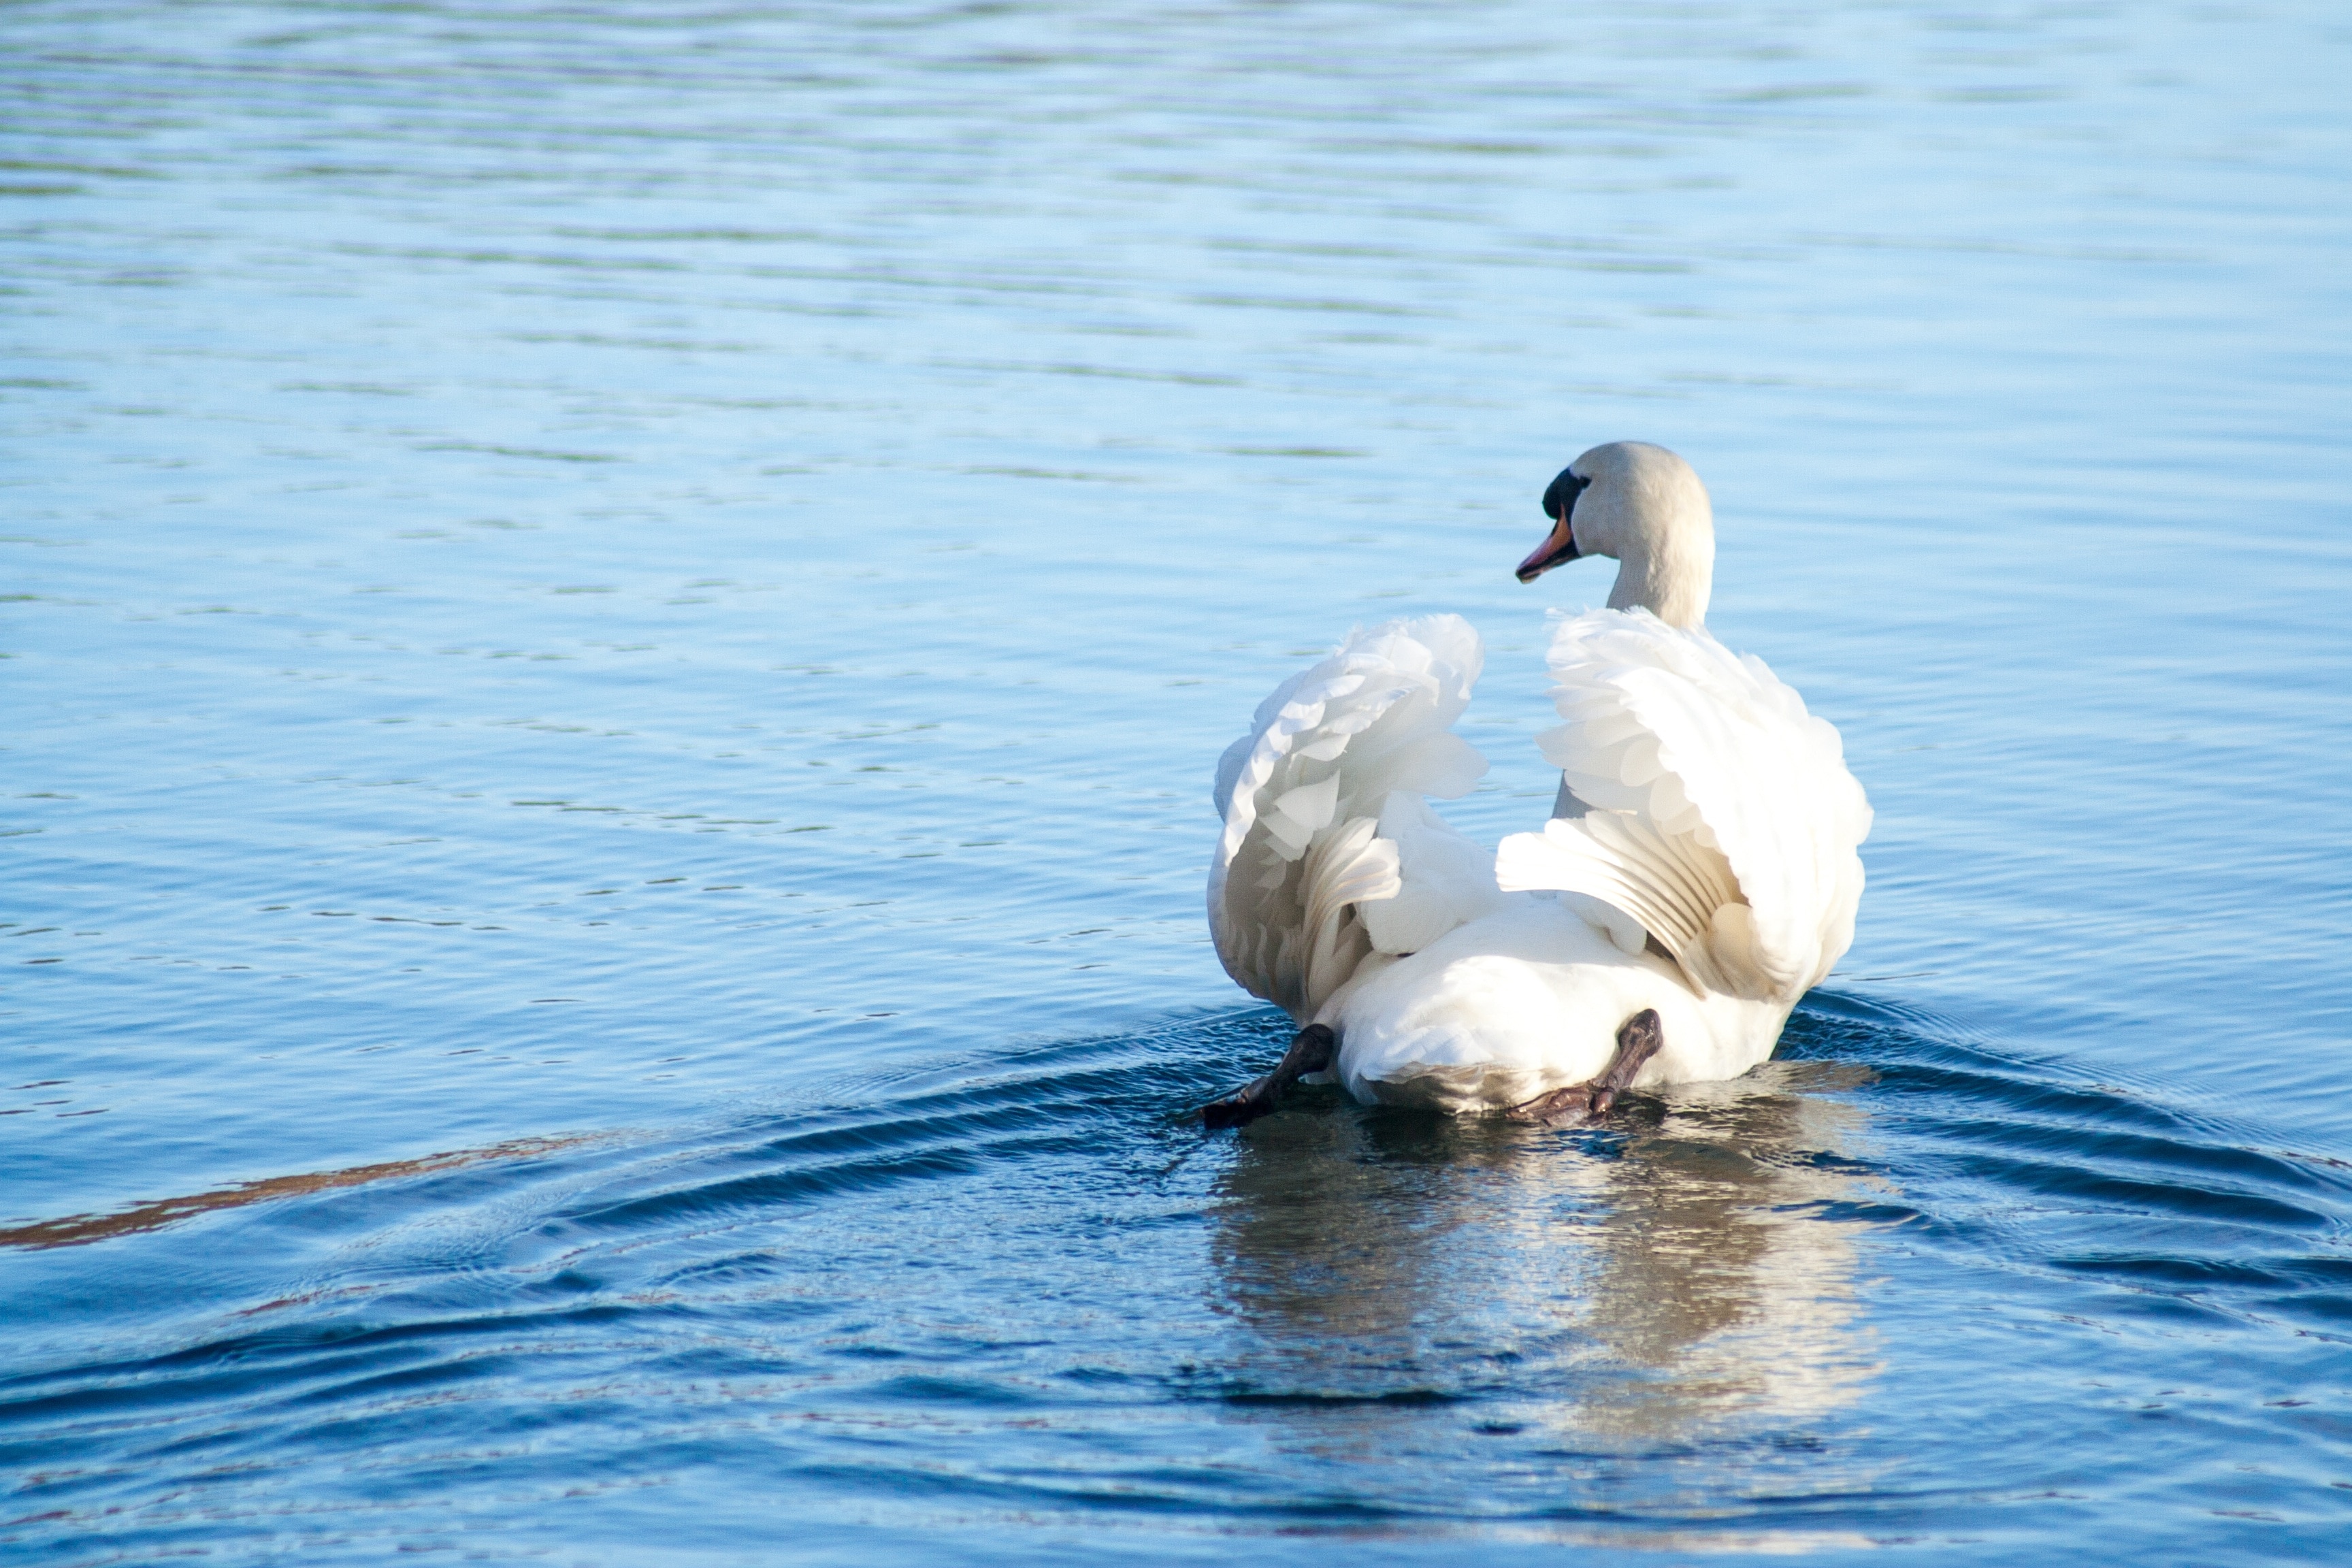 white swan on body of water during daytime